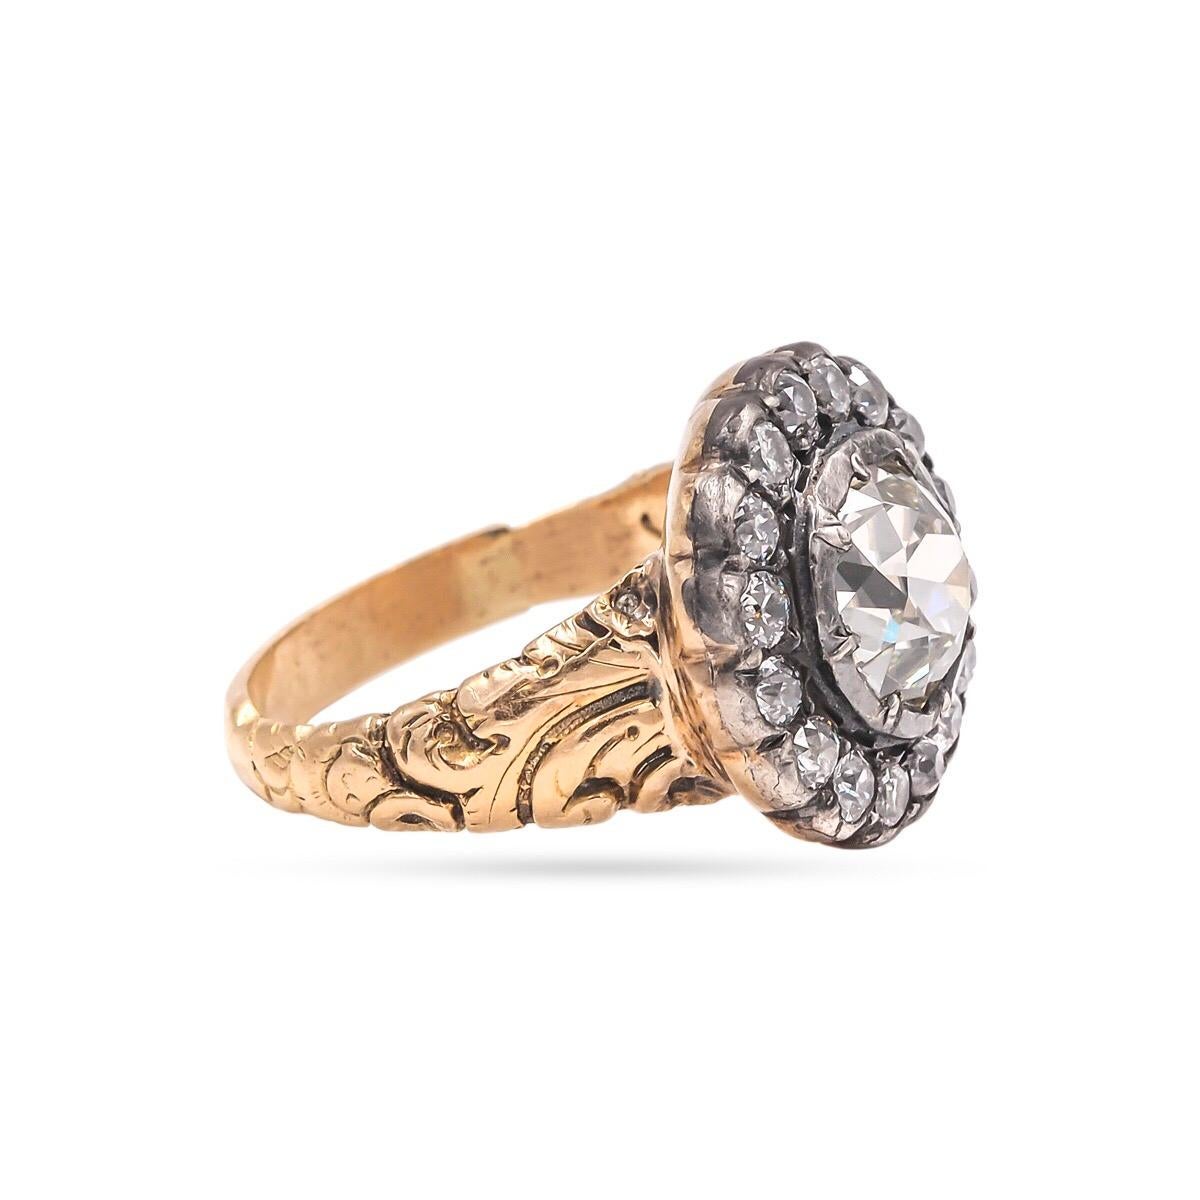 A superb example of a Victorian Era Cluster Ring. Composed of 15 Karat Yellow Gold & Silver. This Victorian era ring (circa 1860) features a center stone 2.17 Ct. Old Mine Cut Diamond. Surrounded by 16 Old European Cut Diamonds weighing 0.56 Ct. in